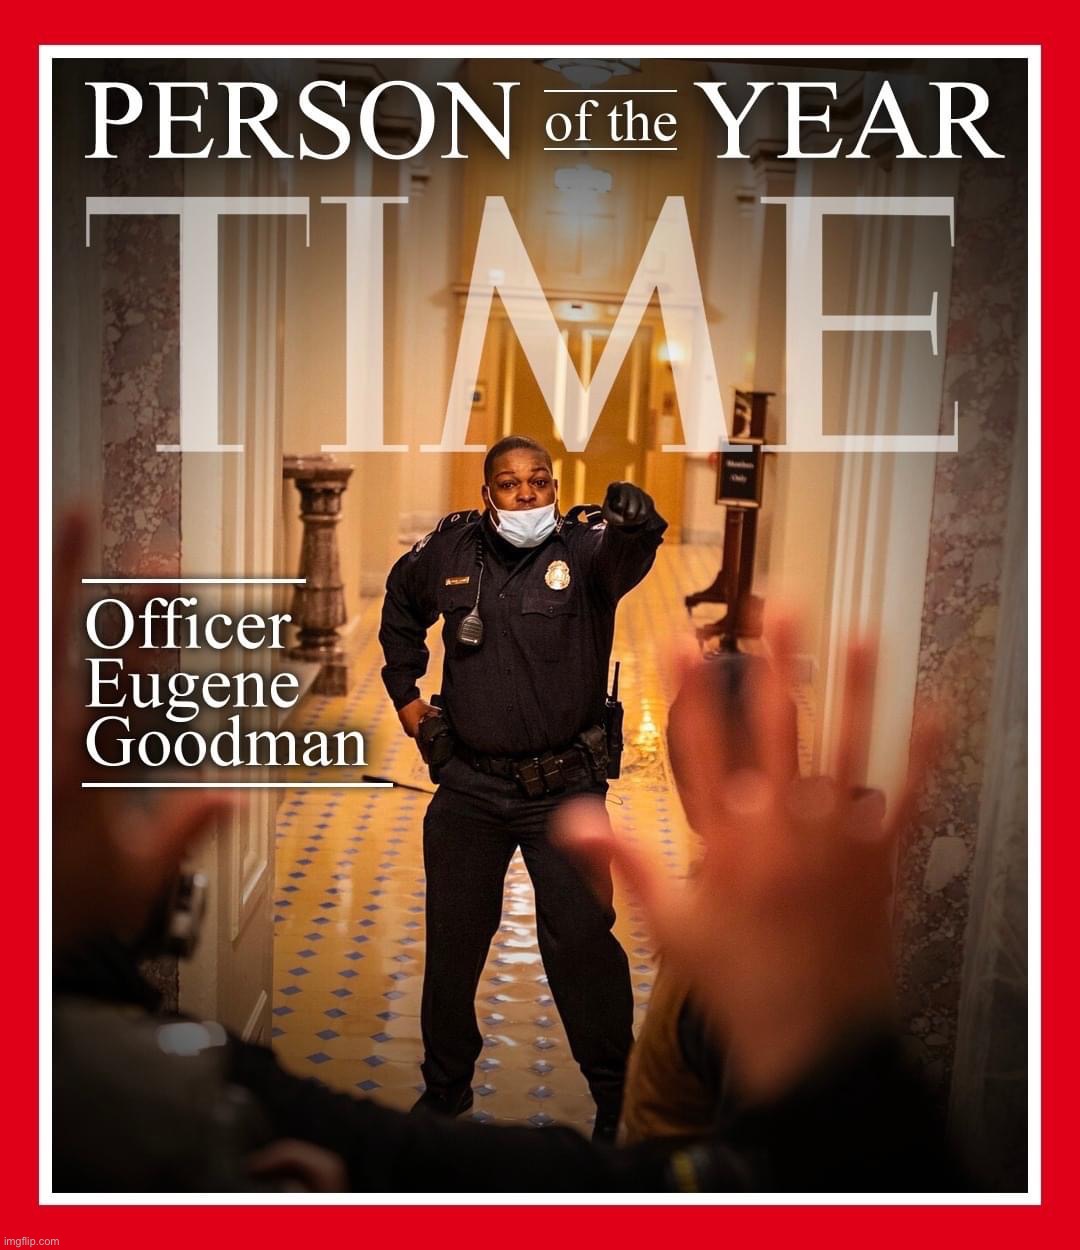 On this stream, things are as they should be :) | image tagged in officer eugene goodman person of the year 2021 | made w/ Imgflip meme maker